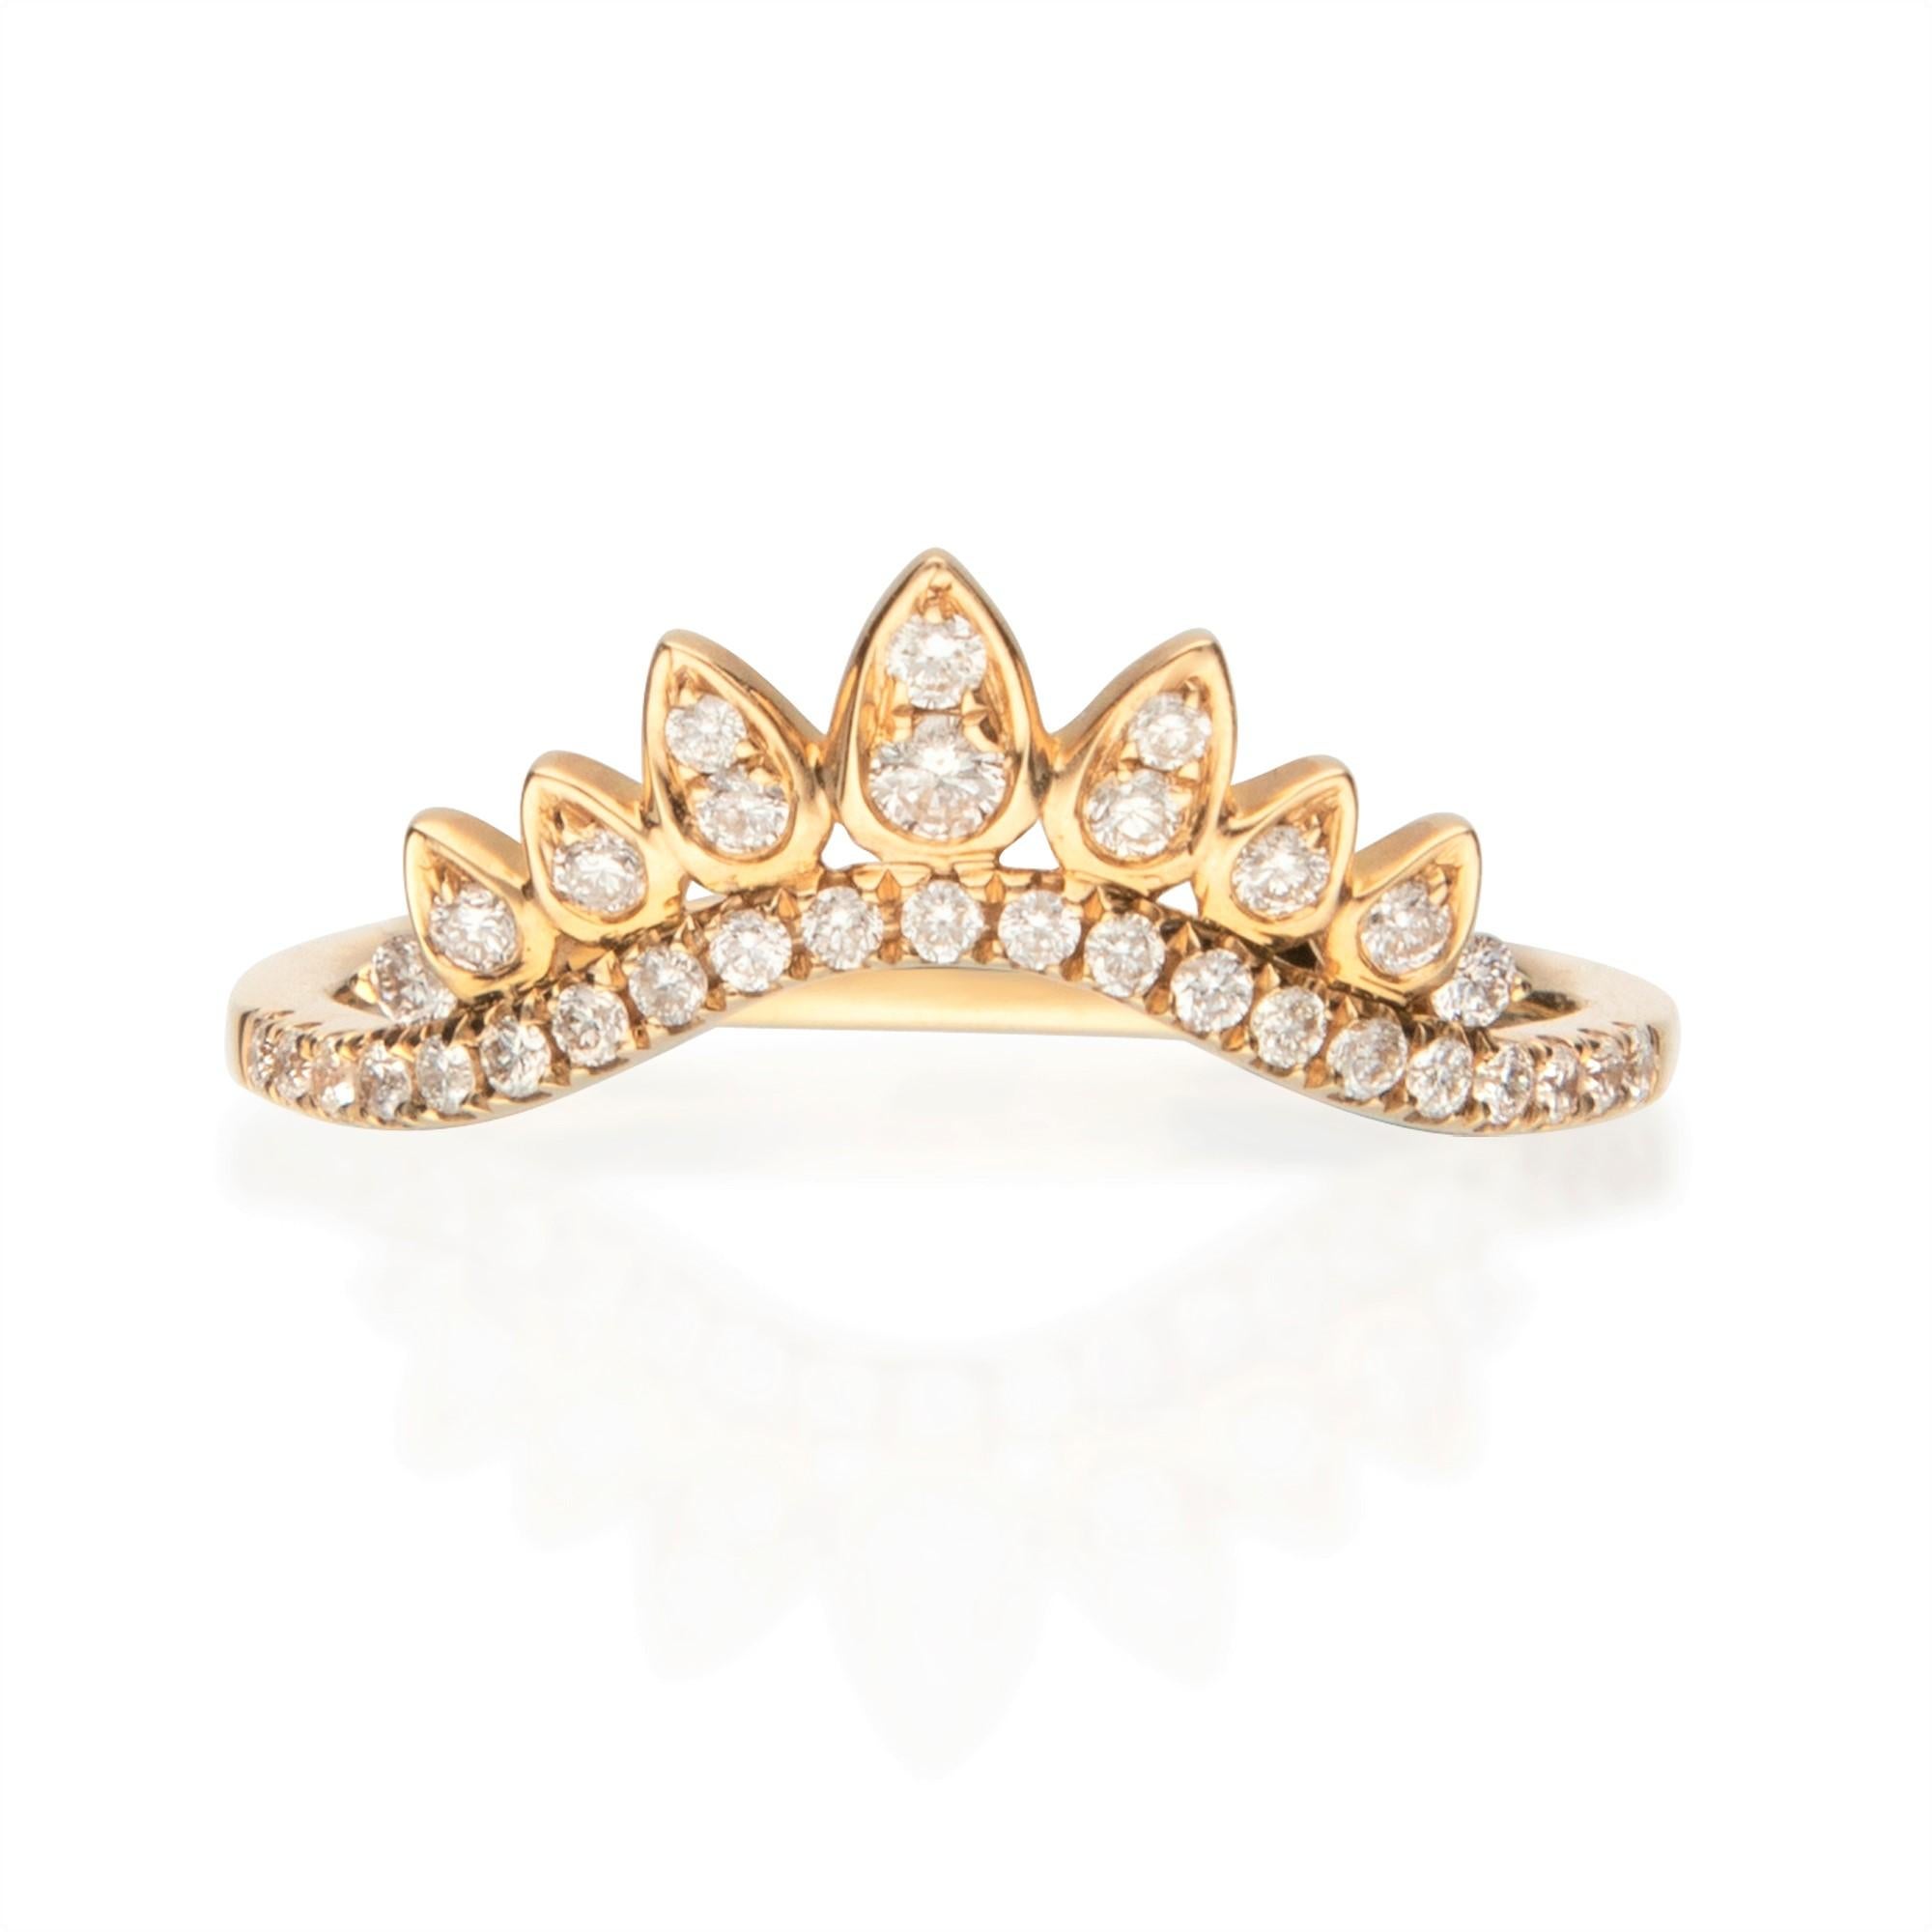 A magnificent Gin and Grace Diamond band ring crafted of 14 karat Yellow gold. This jewelry is for every occasion. 
This ring features an 33 Round diamonds 0.27 ct. of GH-SI quality with a lovely design. 

Diamonds: 0.27 Carat
Quality: GH Color, SI